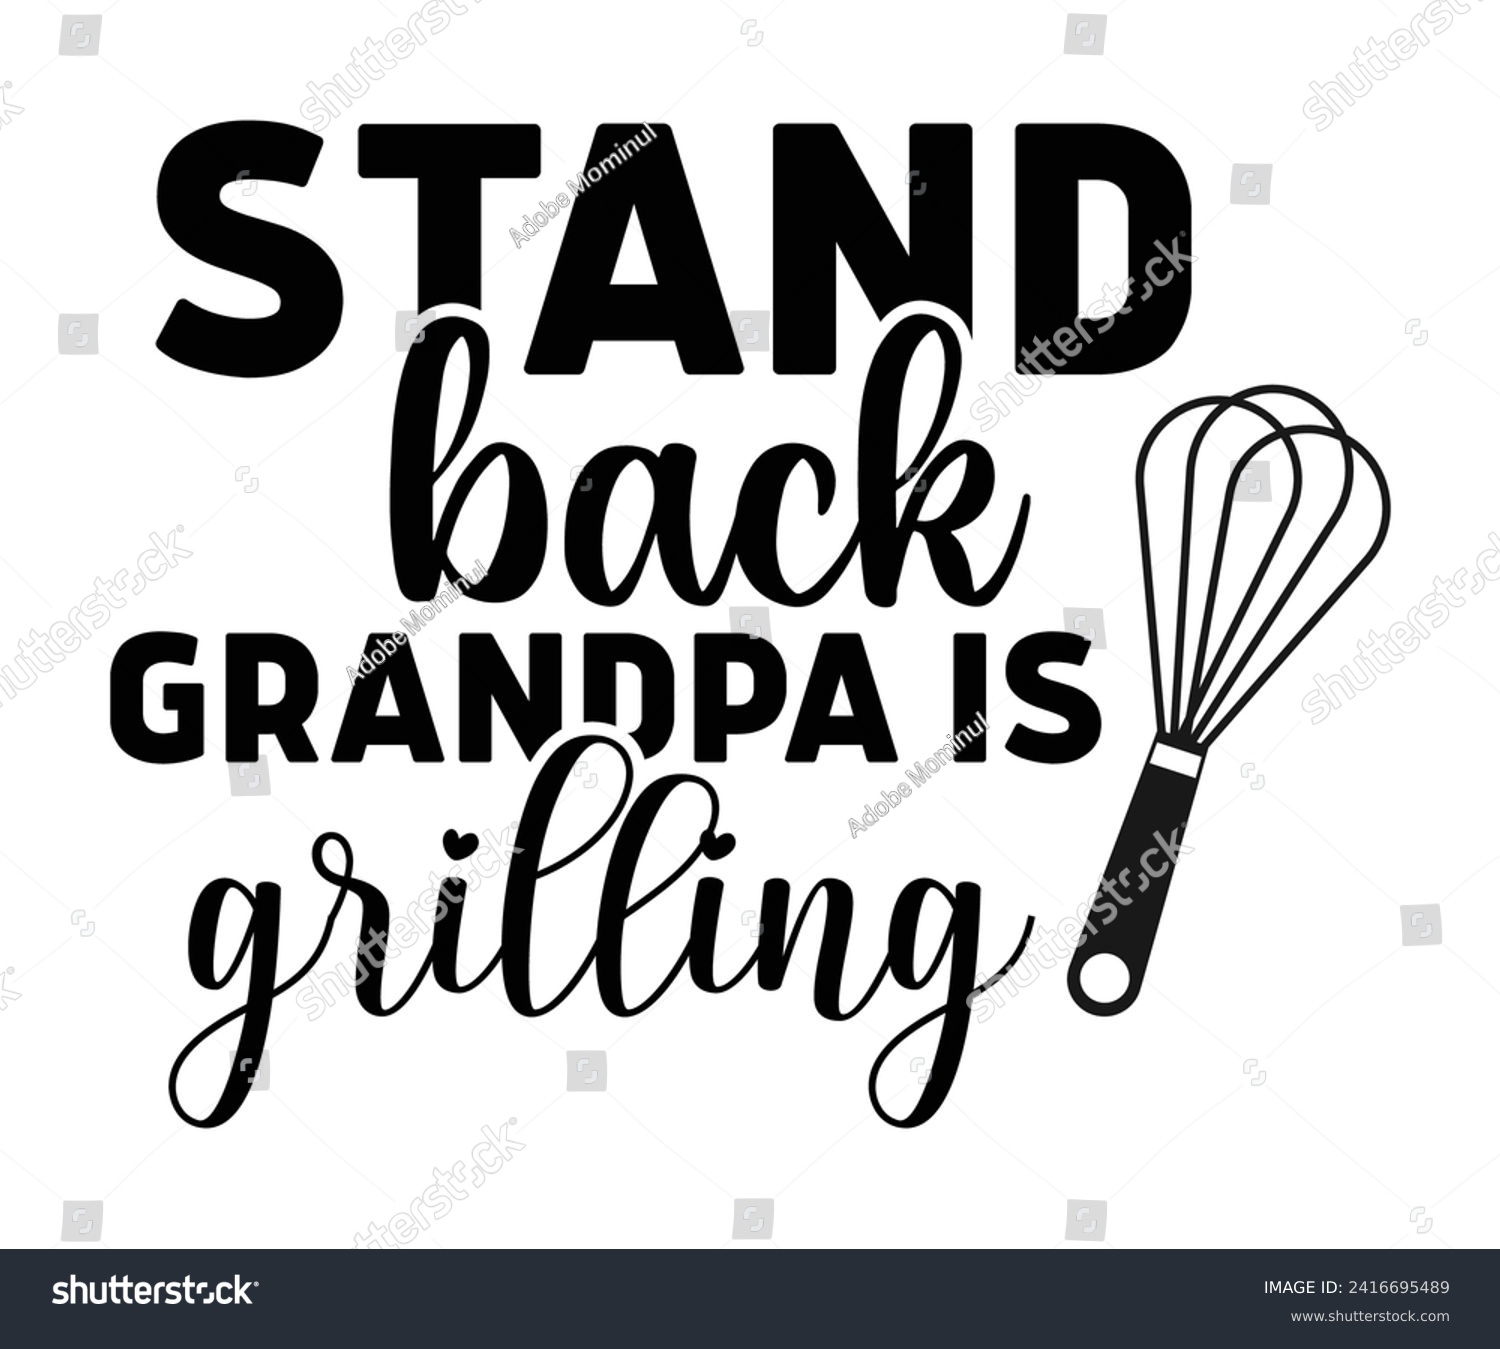 SVG of Stand Back Grandpa is Grilling Svg,Father's Day Svg,Papa svg,Grandpa Svg,Father's Day Saying Qoutes,Dad Svg,Funny Father, Gift For Dad Svg,Daddy Svg,Family Svg,T shirt Design,Svg Cut File,Typography svg